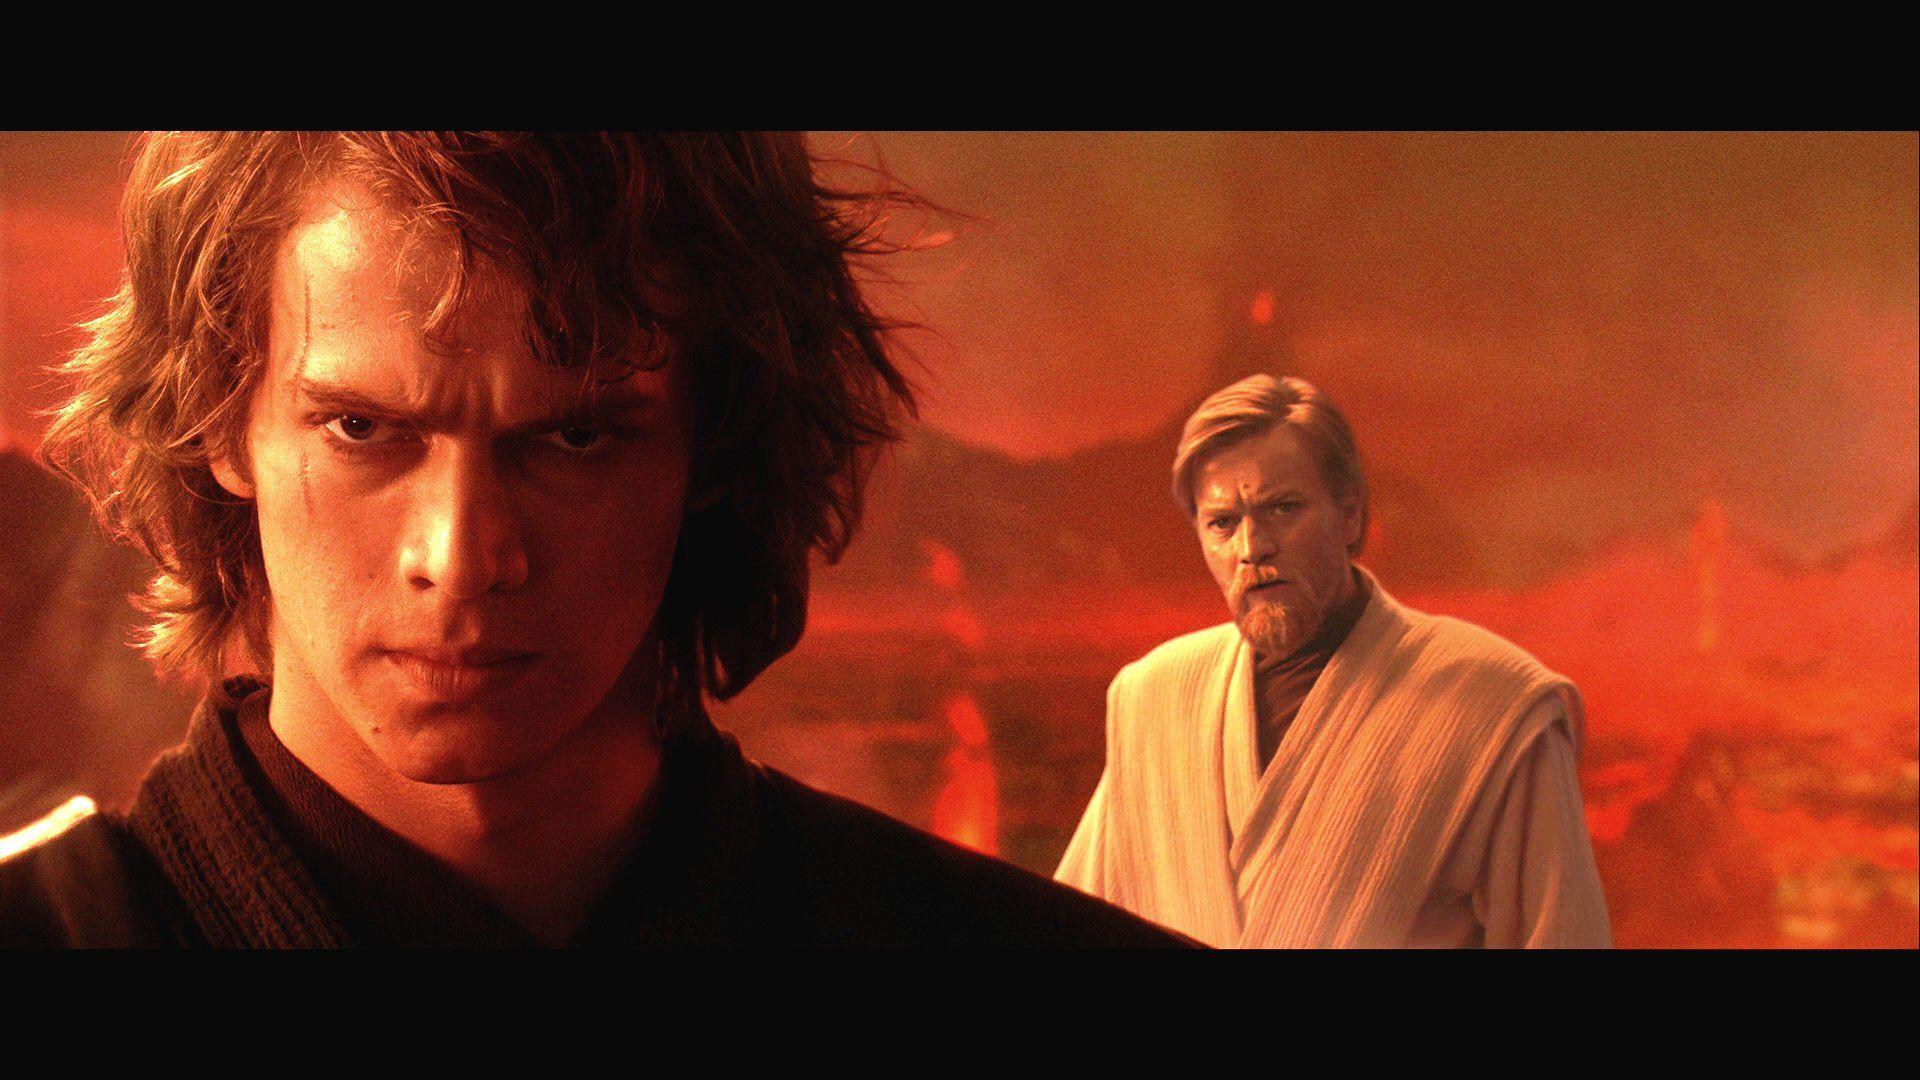 CGB Review of Star Wars Episode III: Revenge of the Sith 2005